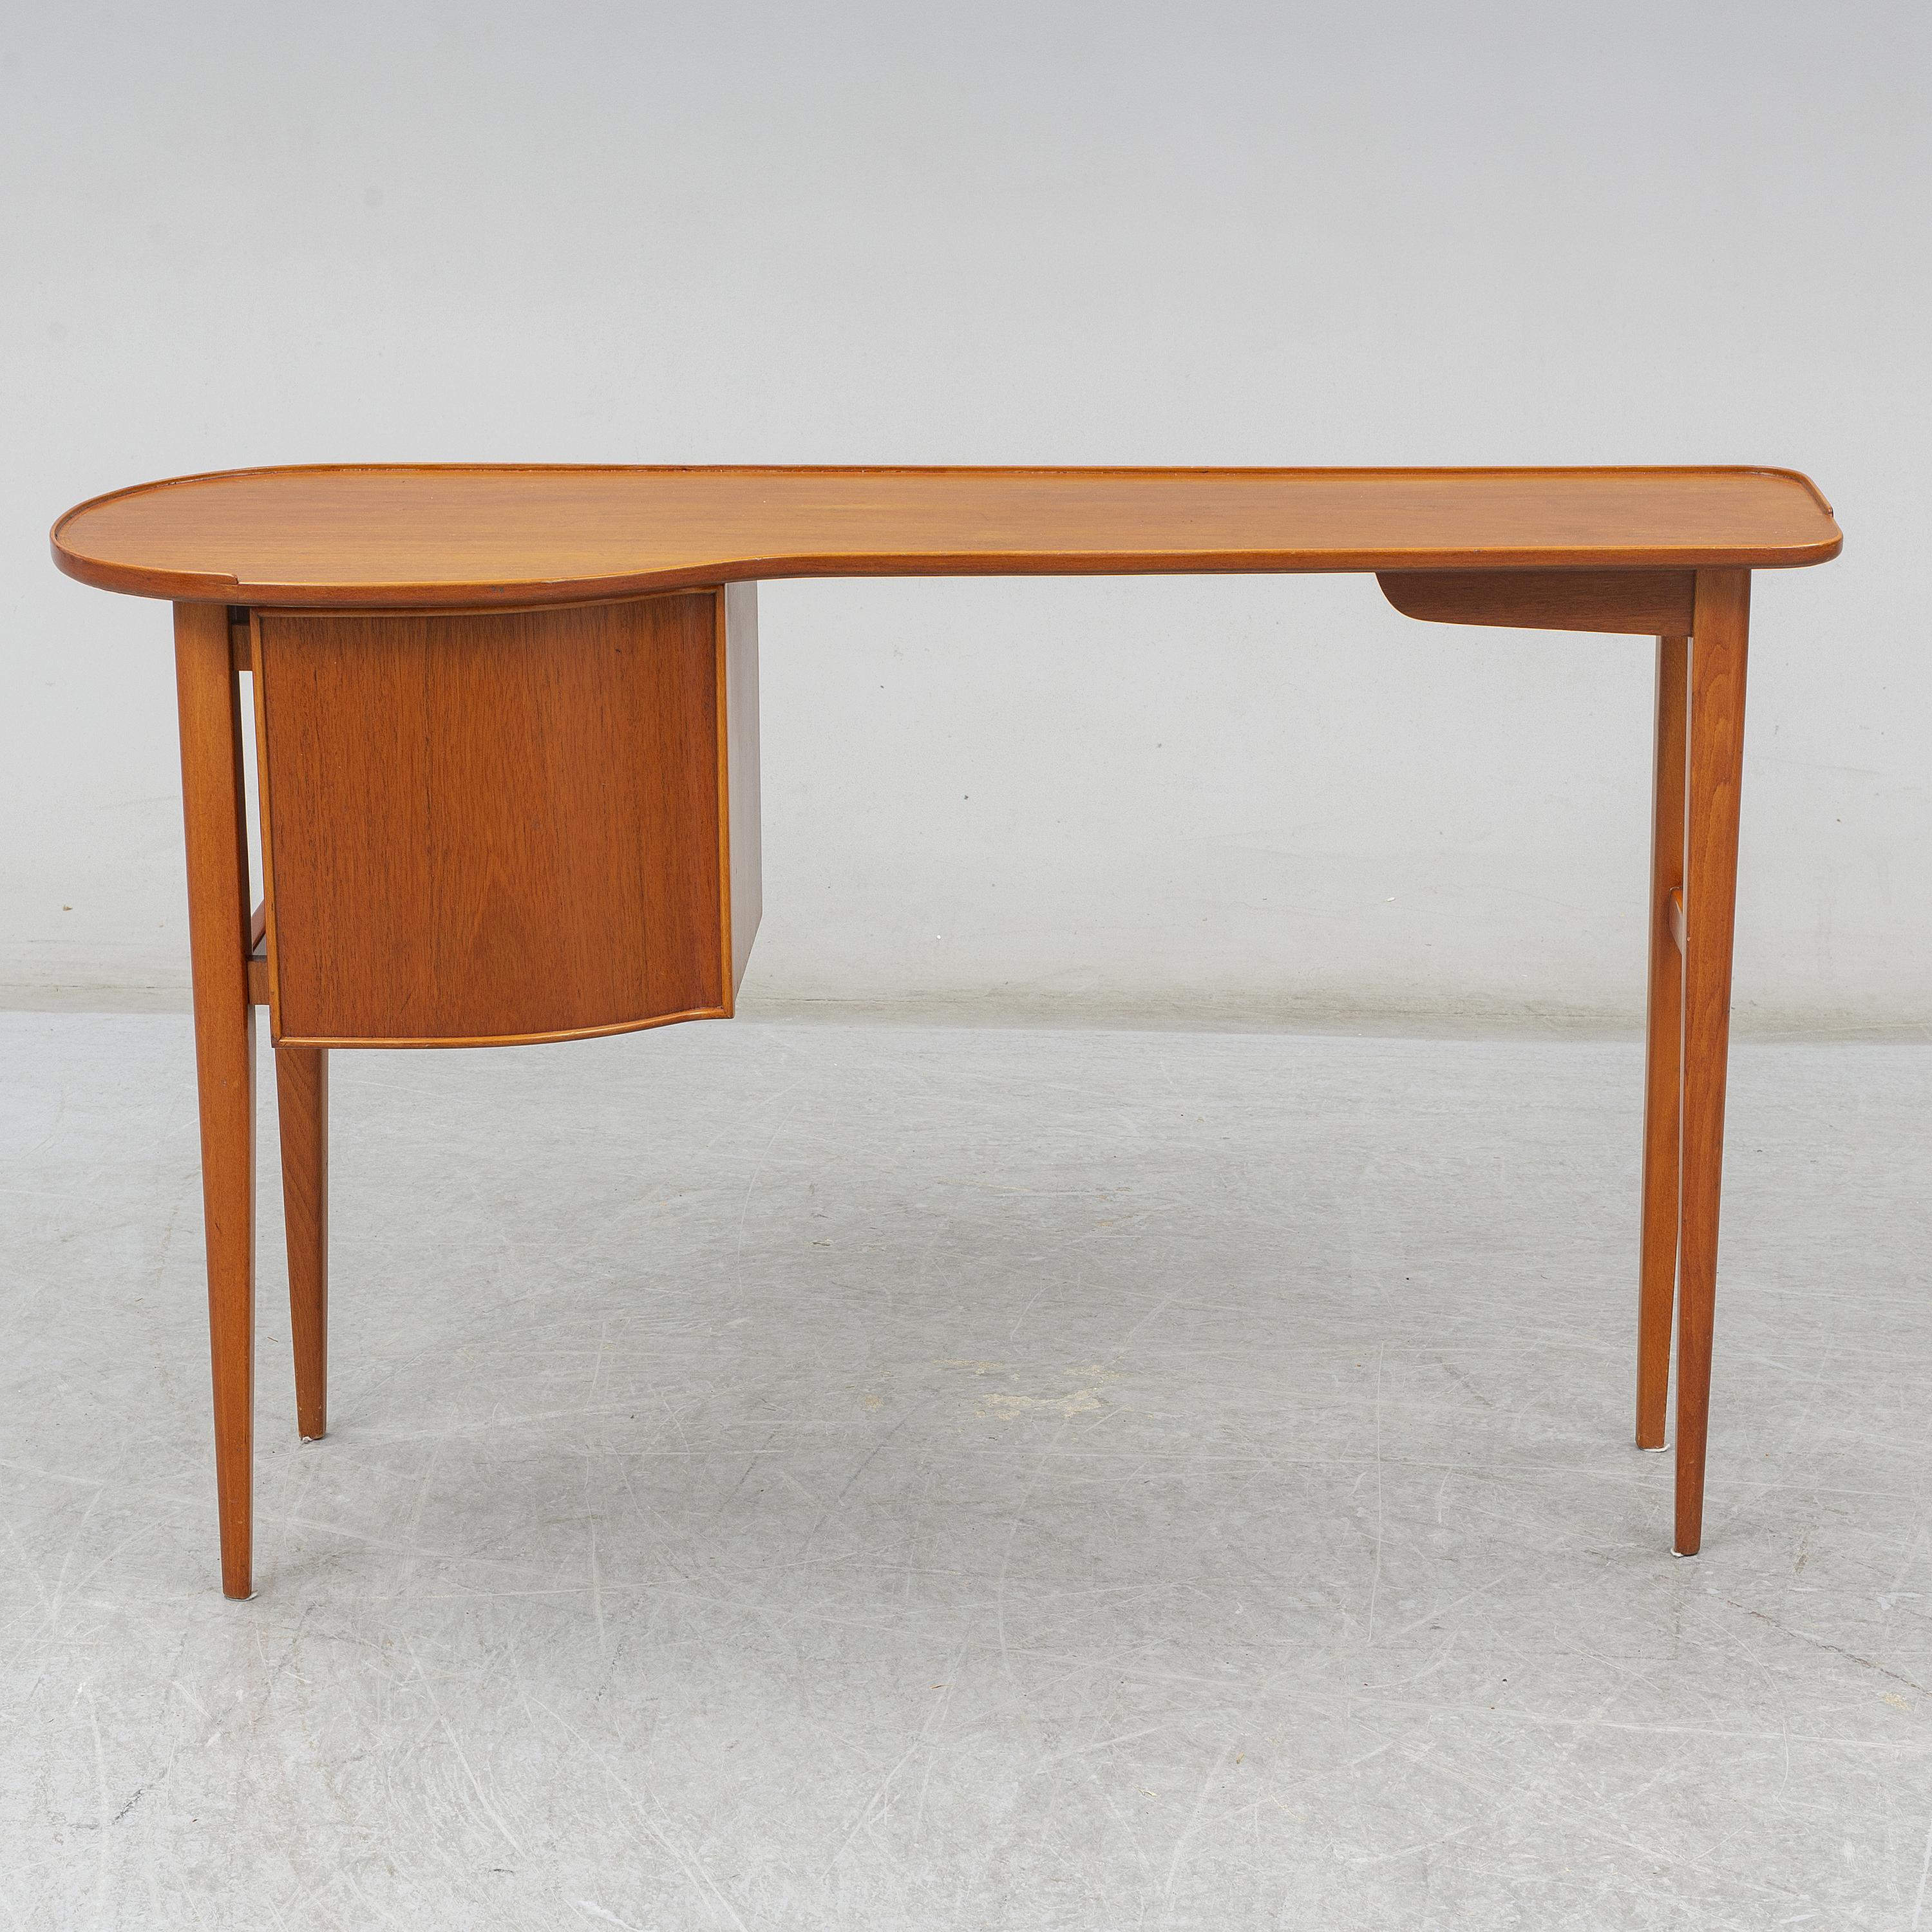 Mid-20th century wooded sideboard in original finish. Can also be used as a small desk, console, or beautiful vanity table.  In the style of Joseph Frank. 
(depth starts at 11.4 and increases to 16.13